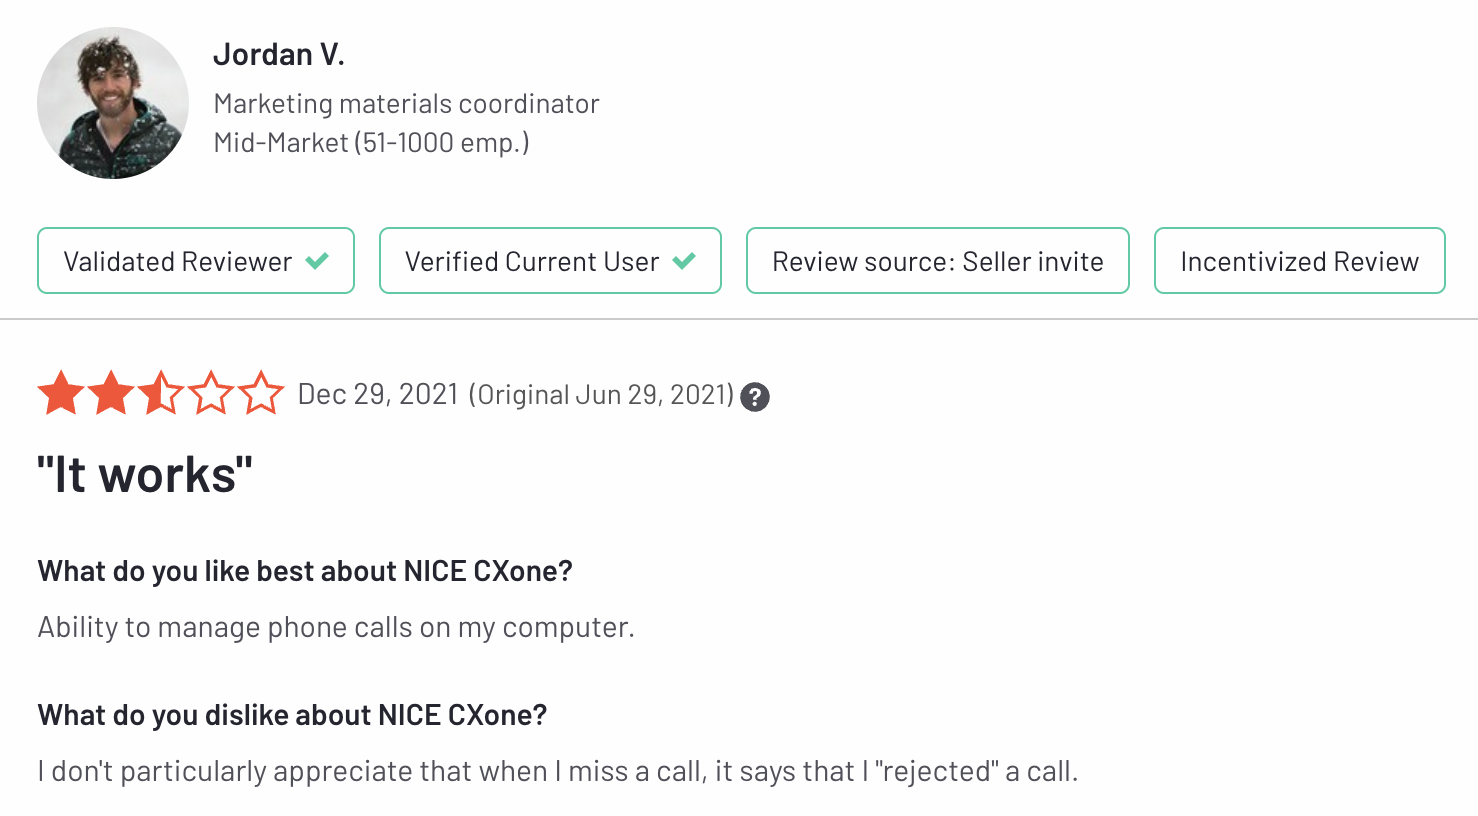 Possible reason for exploring NICE CXone alternatives - missed calls. (G2 review)